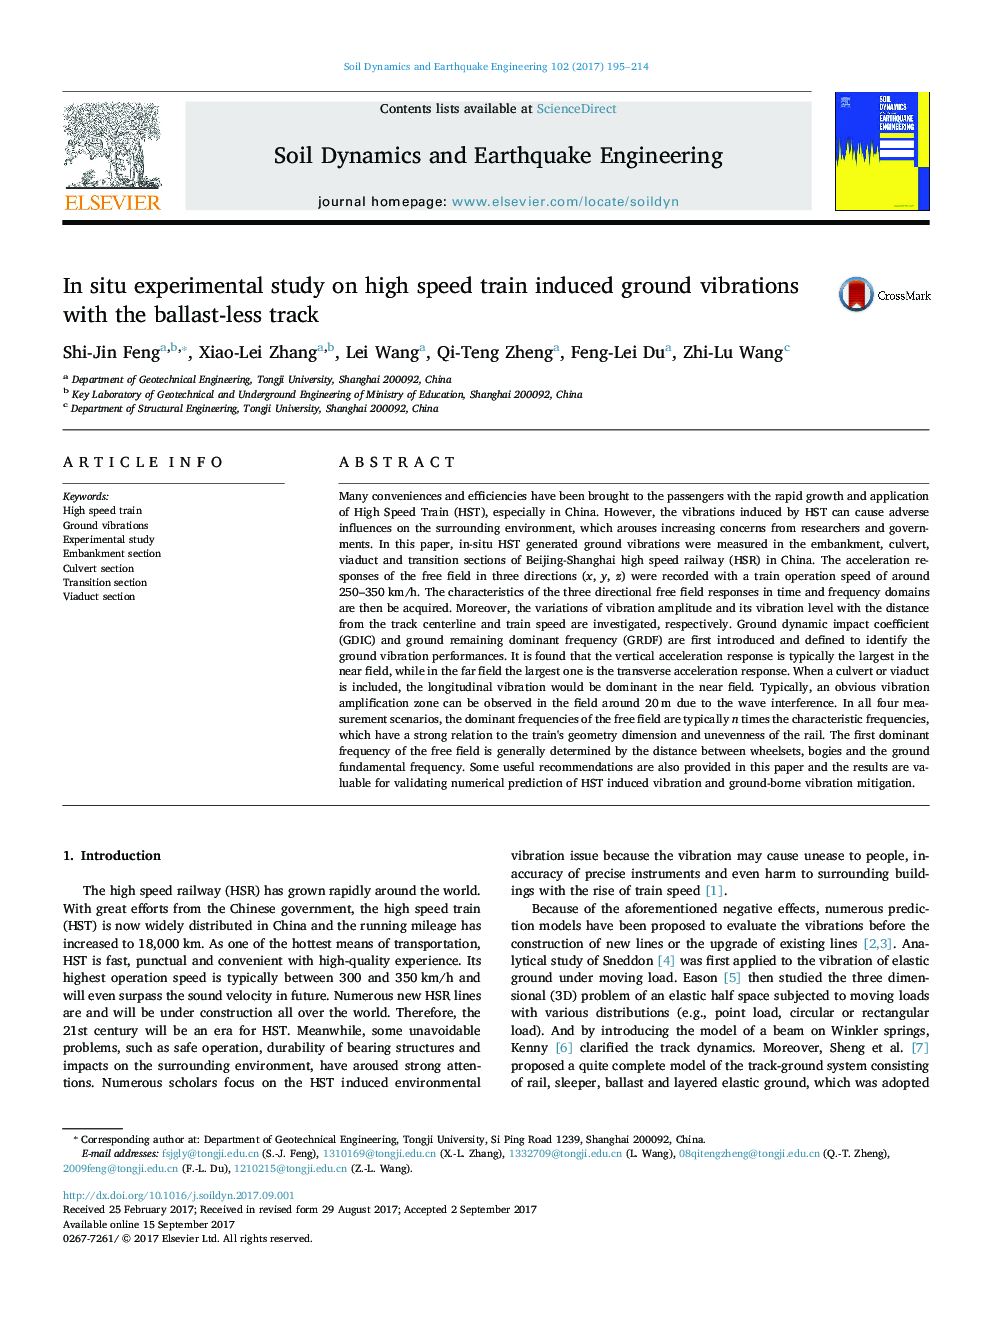 In situ experimental study on high speed train induced ground vibrations with the ballast-less track